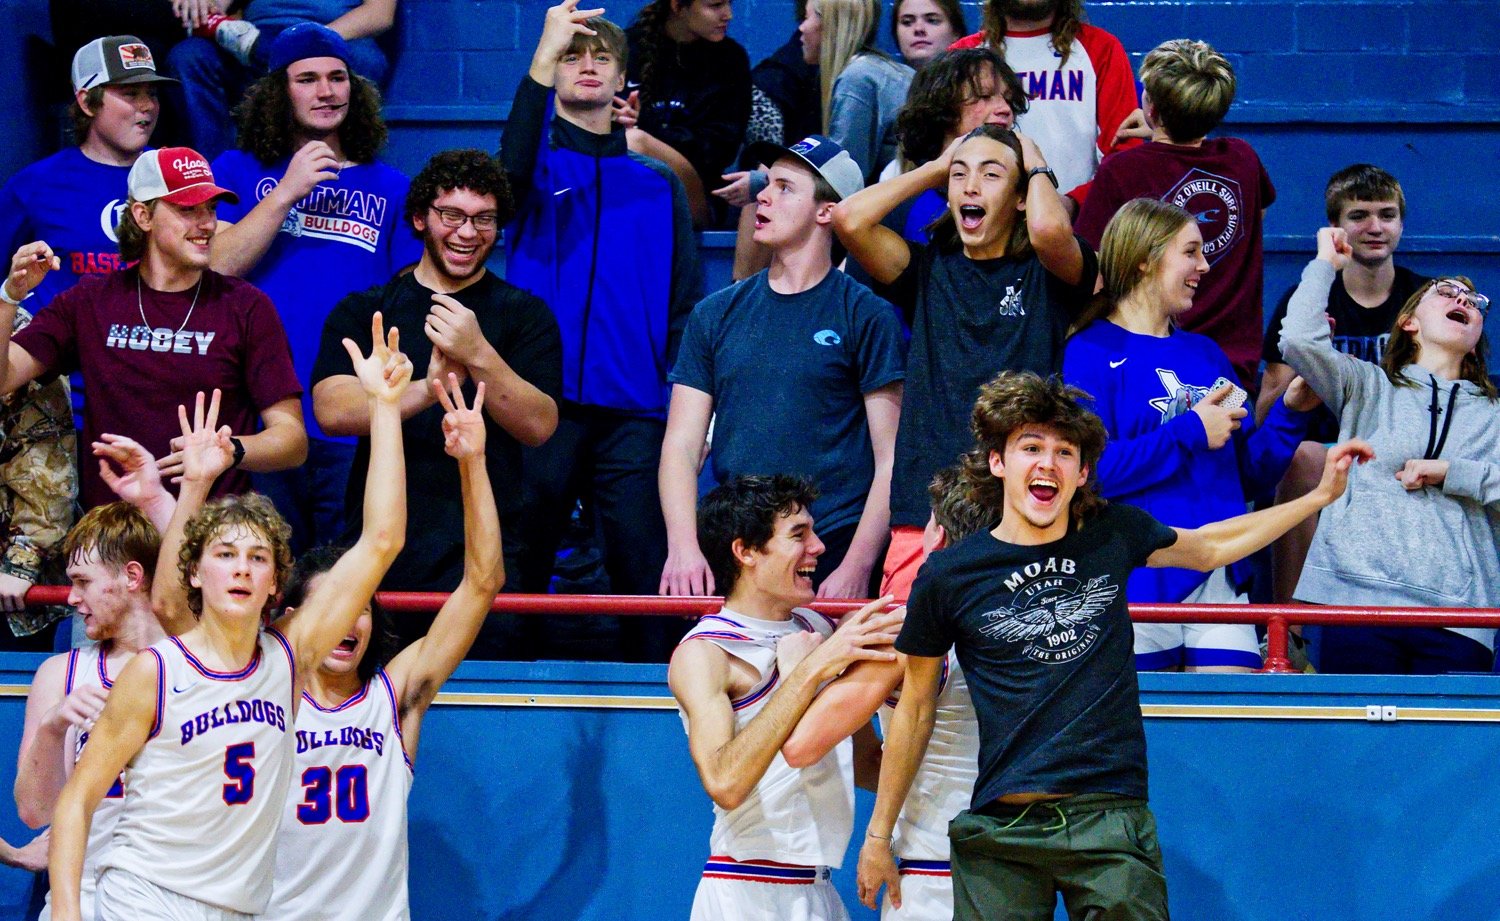 Nothing excites the student section quite like a late-game second-string three-point shot going down. [see more shots, buy basketball photos]